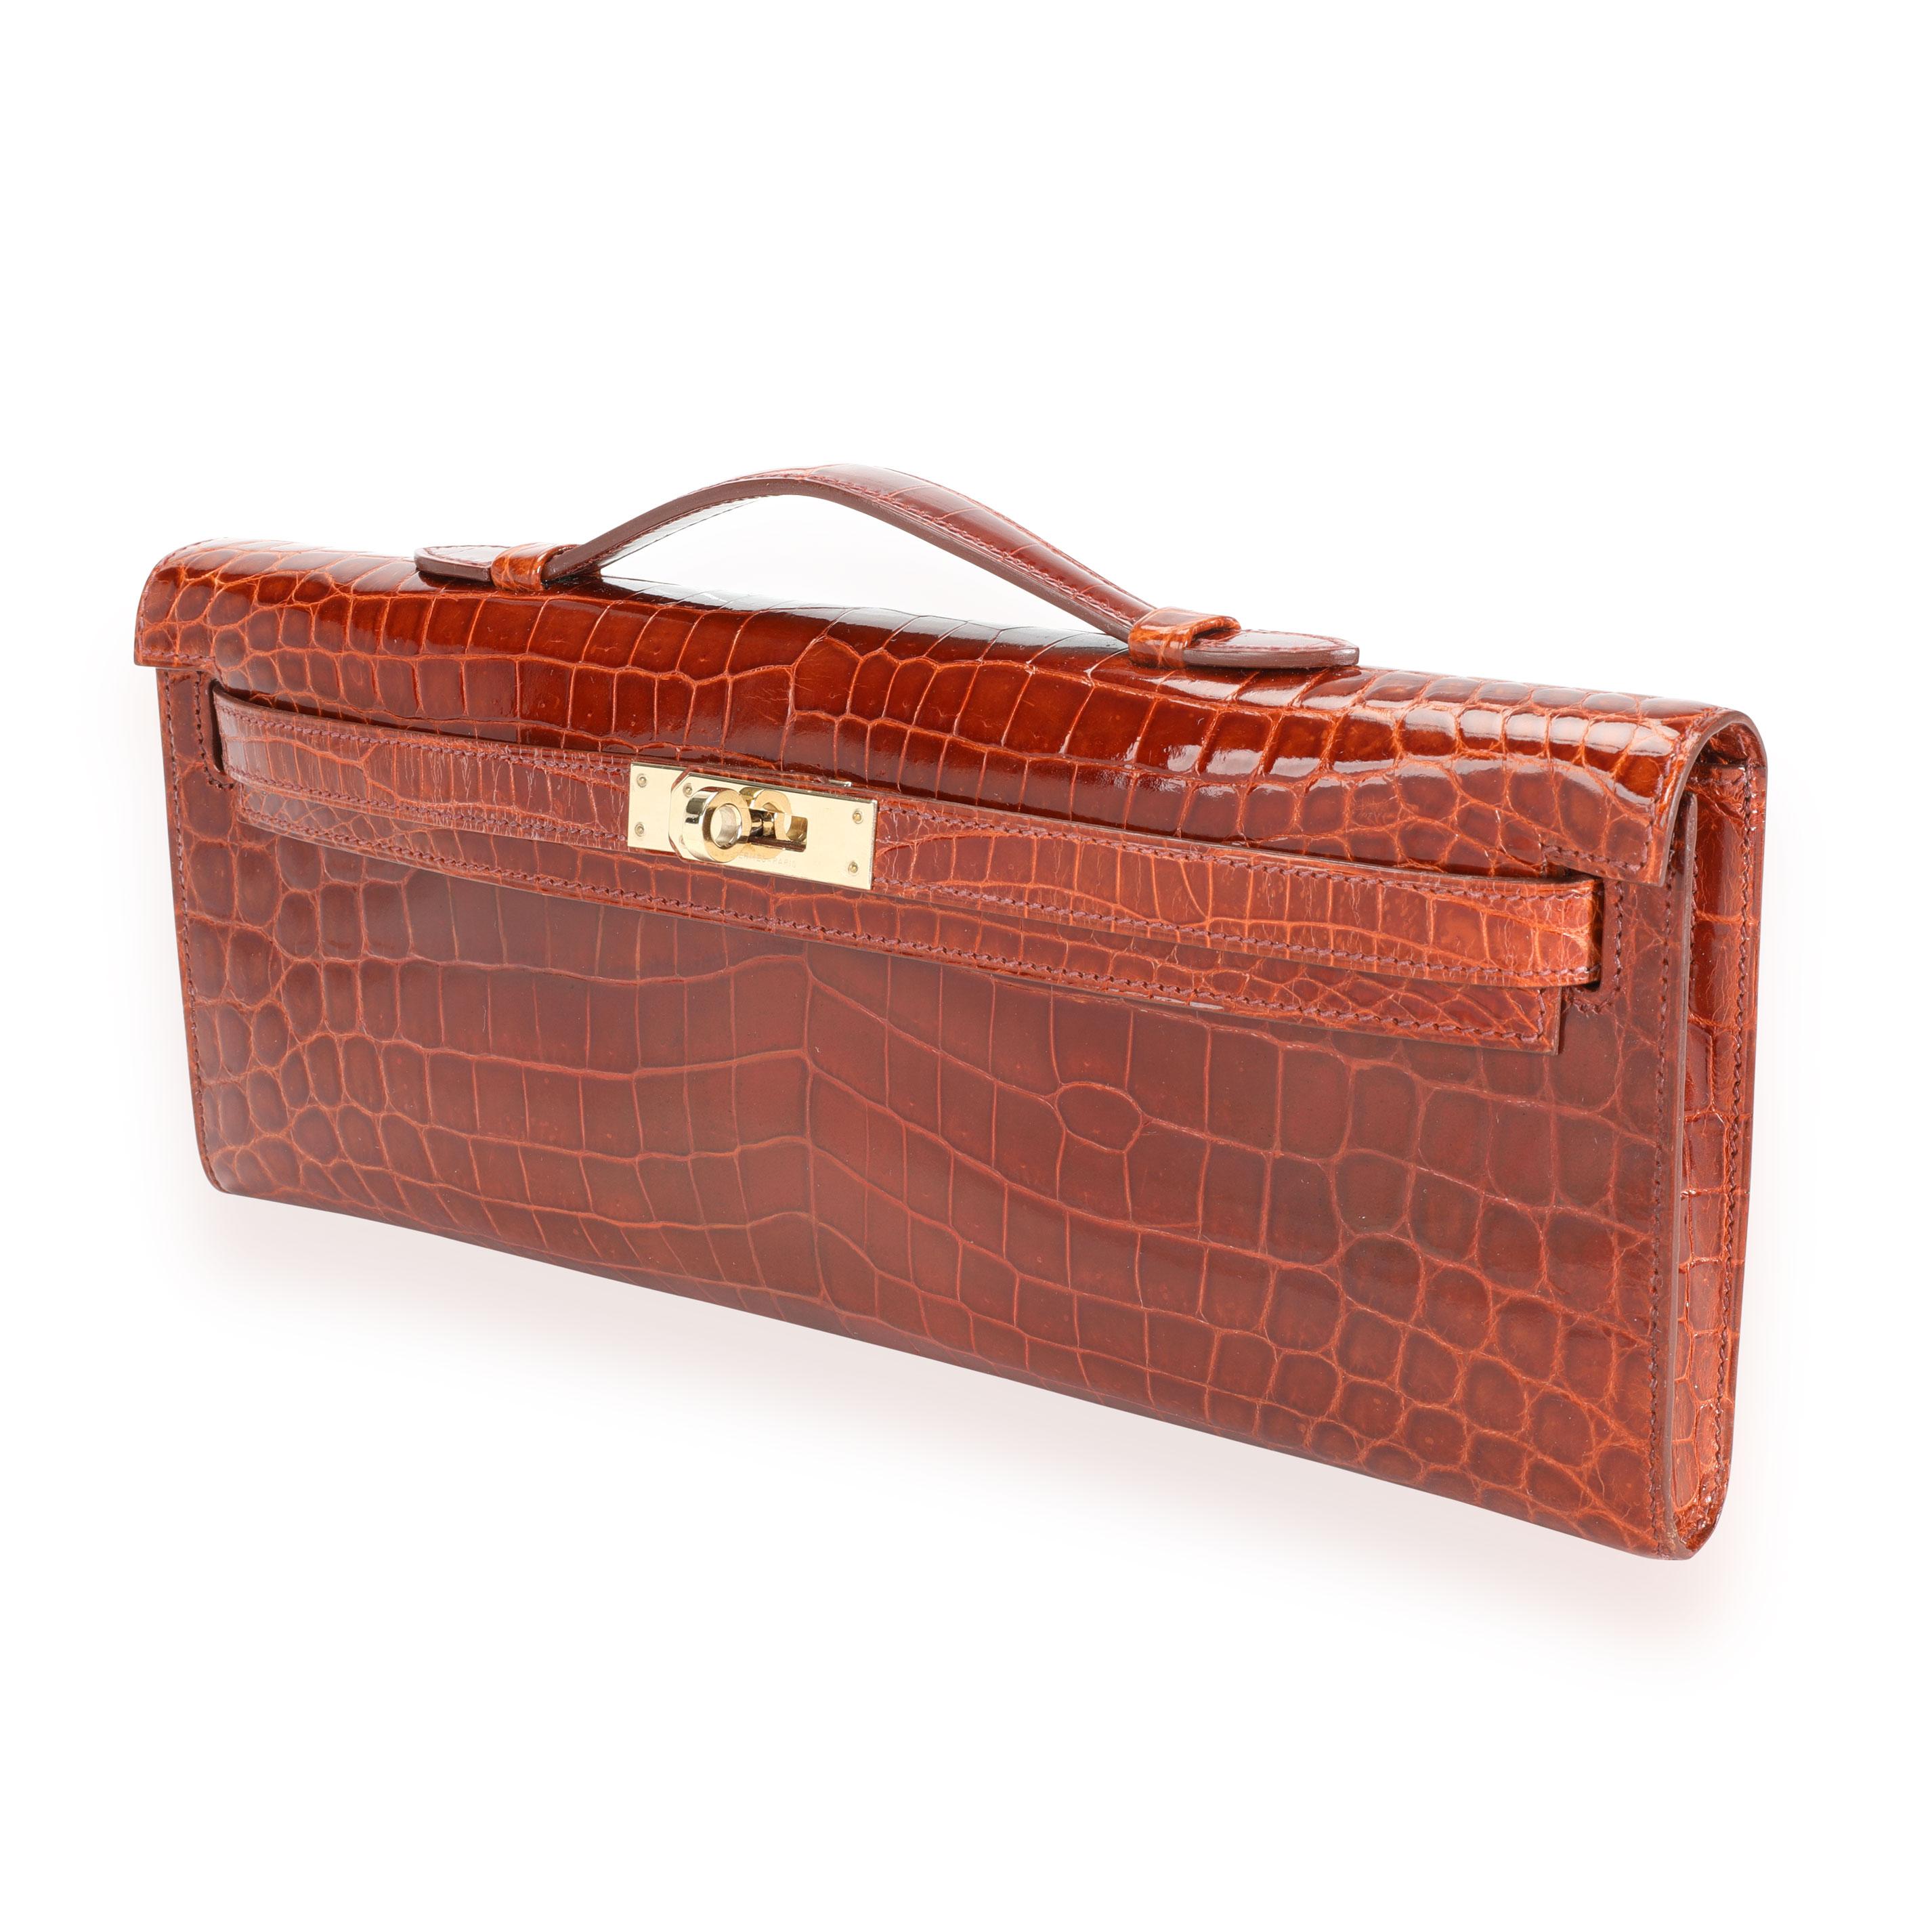 Hermès Miel Shiny Niloticus Crocodile Kelly Cut GHW
SKU: 111768
MSRP:  
Condition: Pre-owned (3000)
Condition Description: 
Handbag Condition: Very Good
Condition Comments: Very Good Condition. Plastic on some hardware. Scratching to hardware. Light